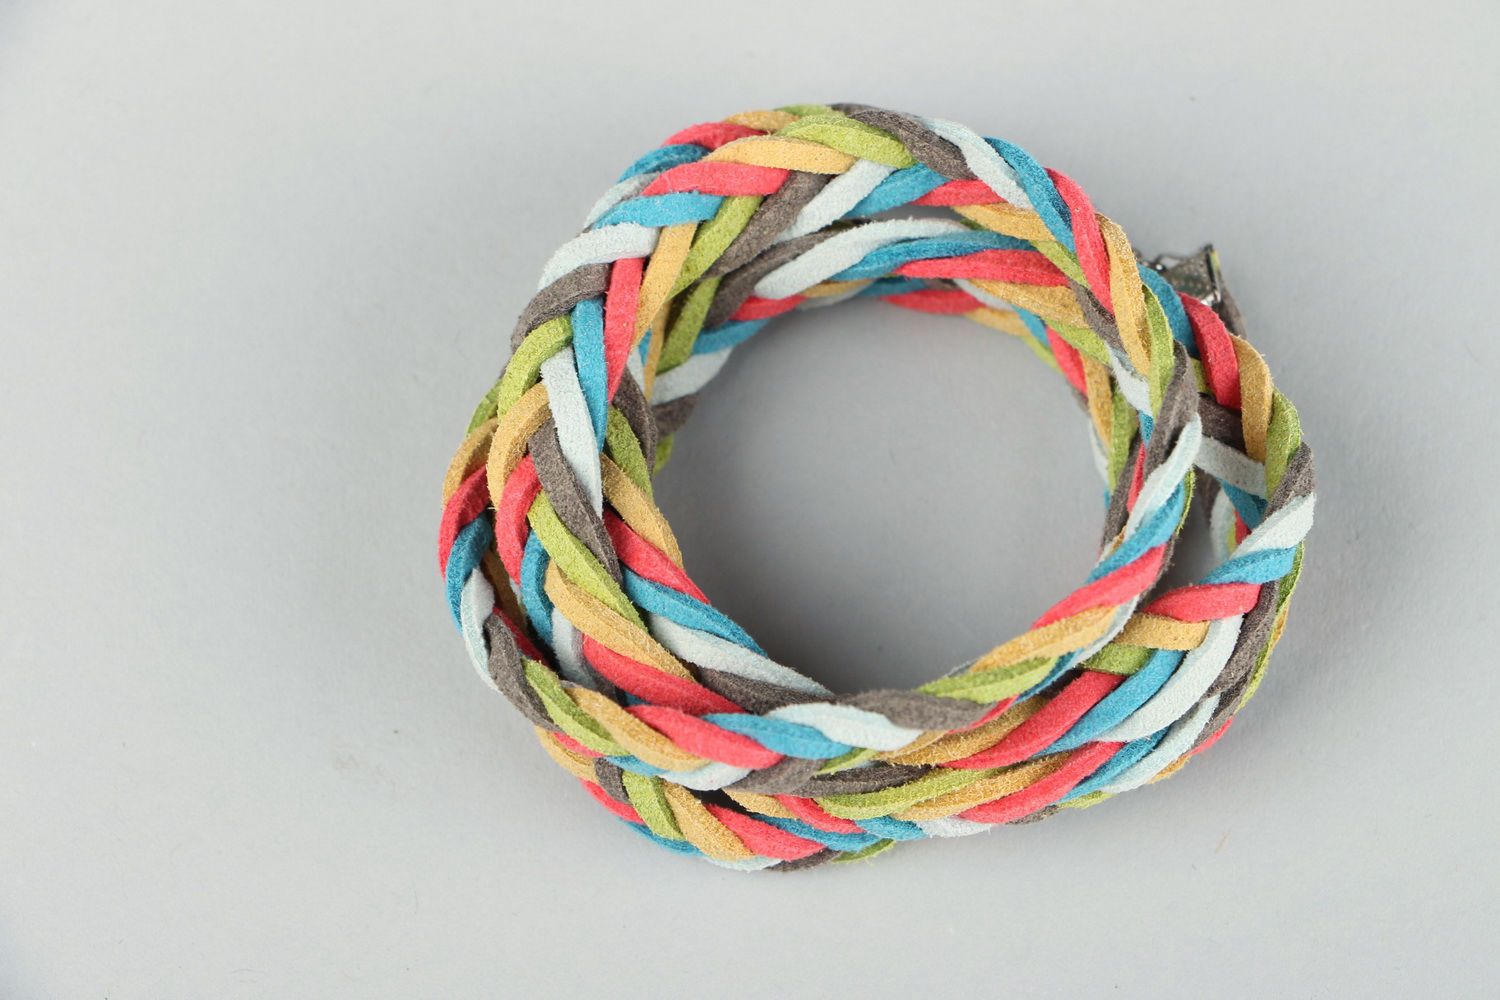 Bracelet of summer colors in Up Helly Aa style photo 2